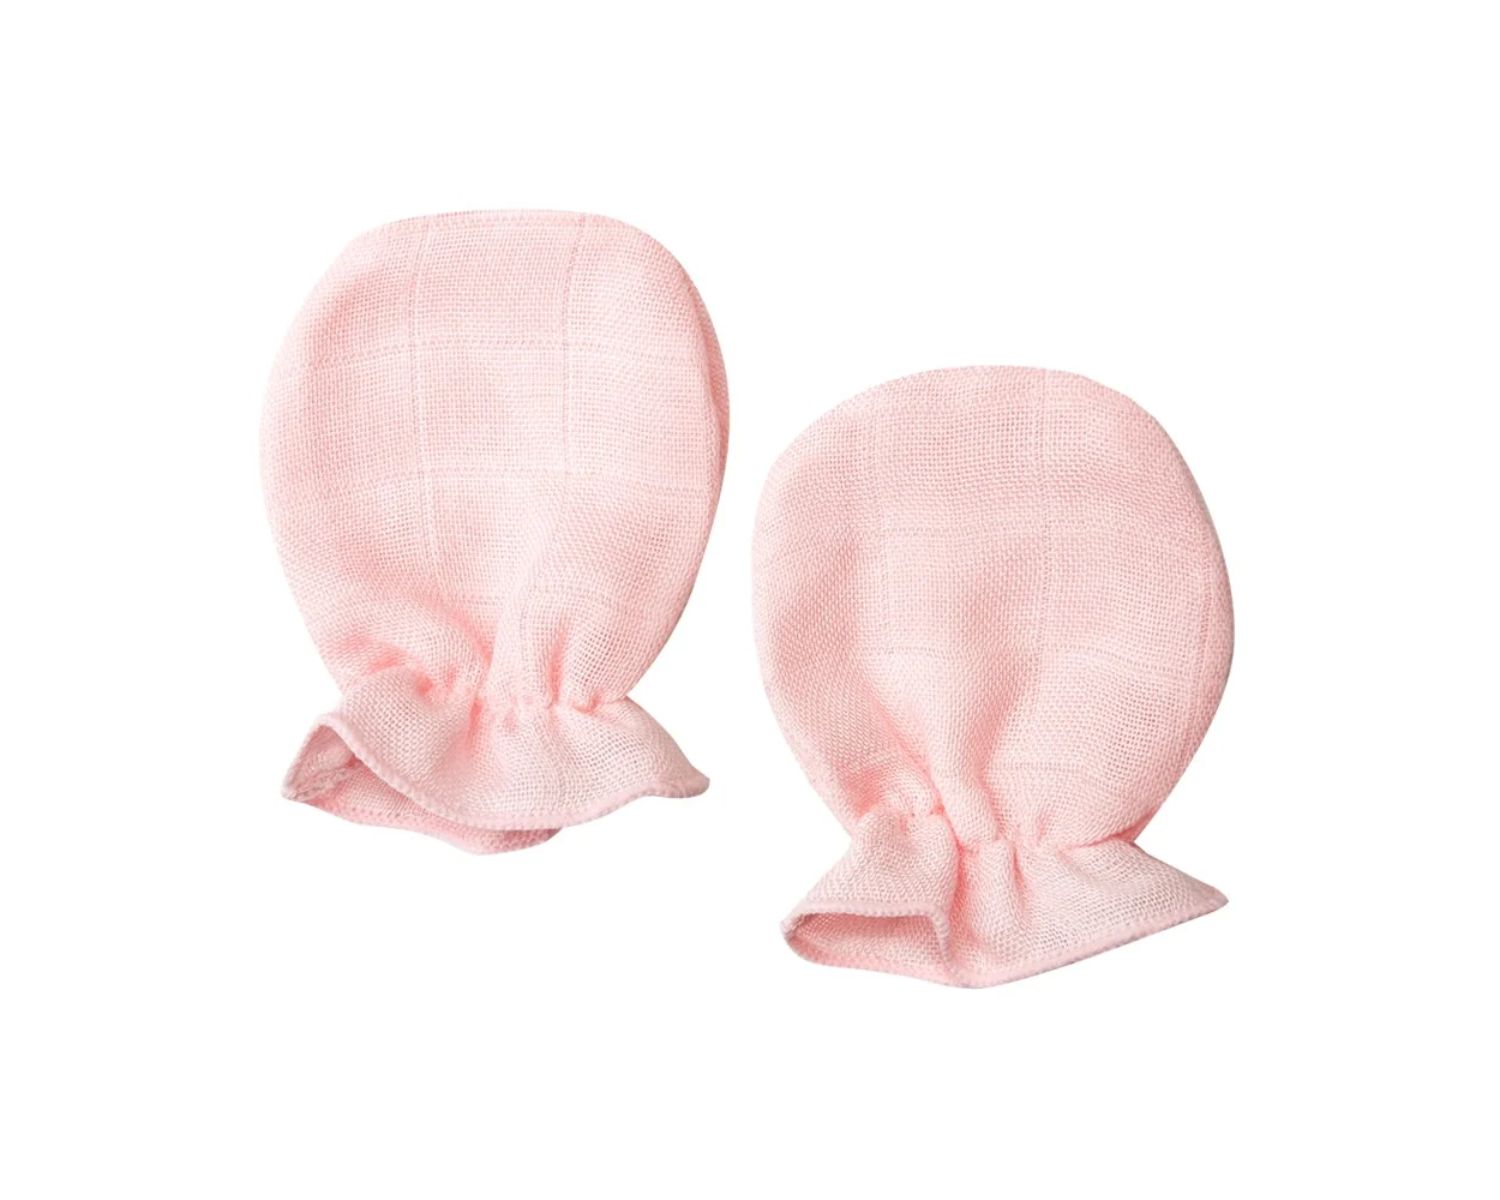 Baby Mittens Review: The Best Options for Keeping Little Hands Warm